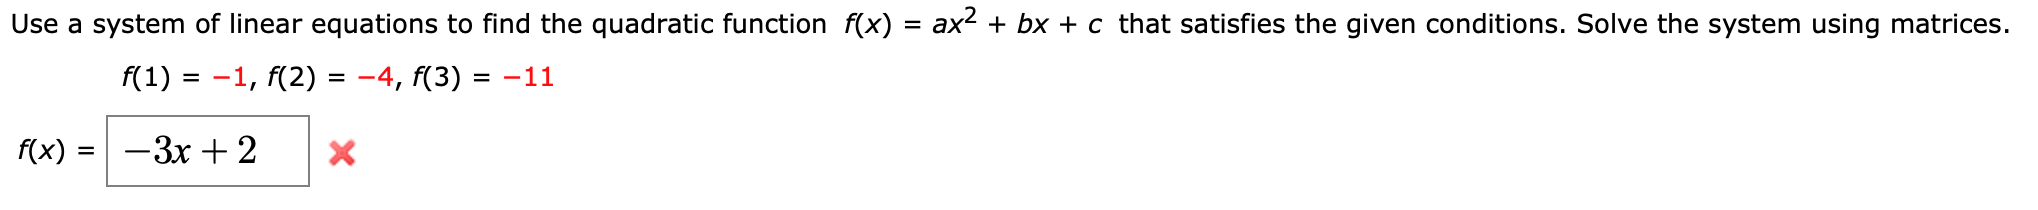 Use a system of linear equations to find the quadratic function f(x) = ax2 + bx + c that satisfies the given conditions. Solve the system using matrices.
f(1) = -1, f(2) = -4, f(3) = -11
%D
%3D
f(x) :
-3x + 2
